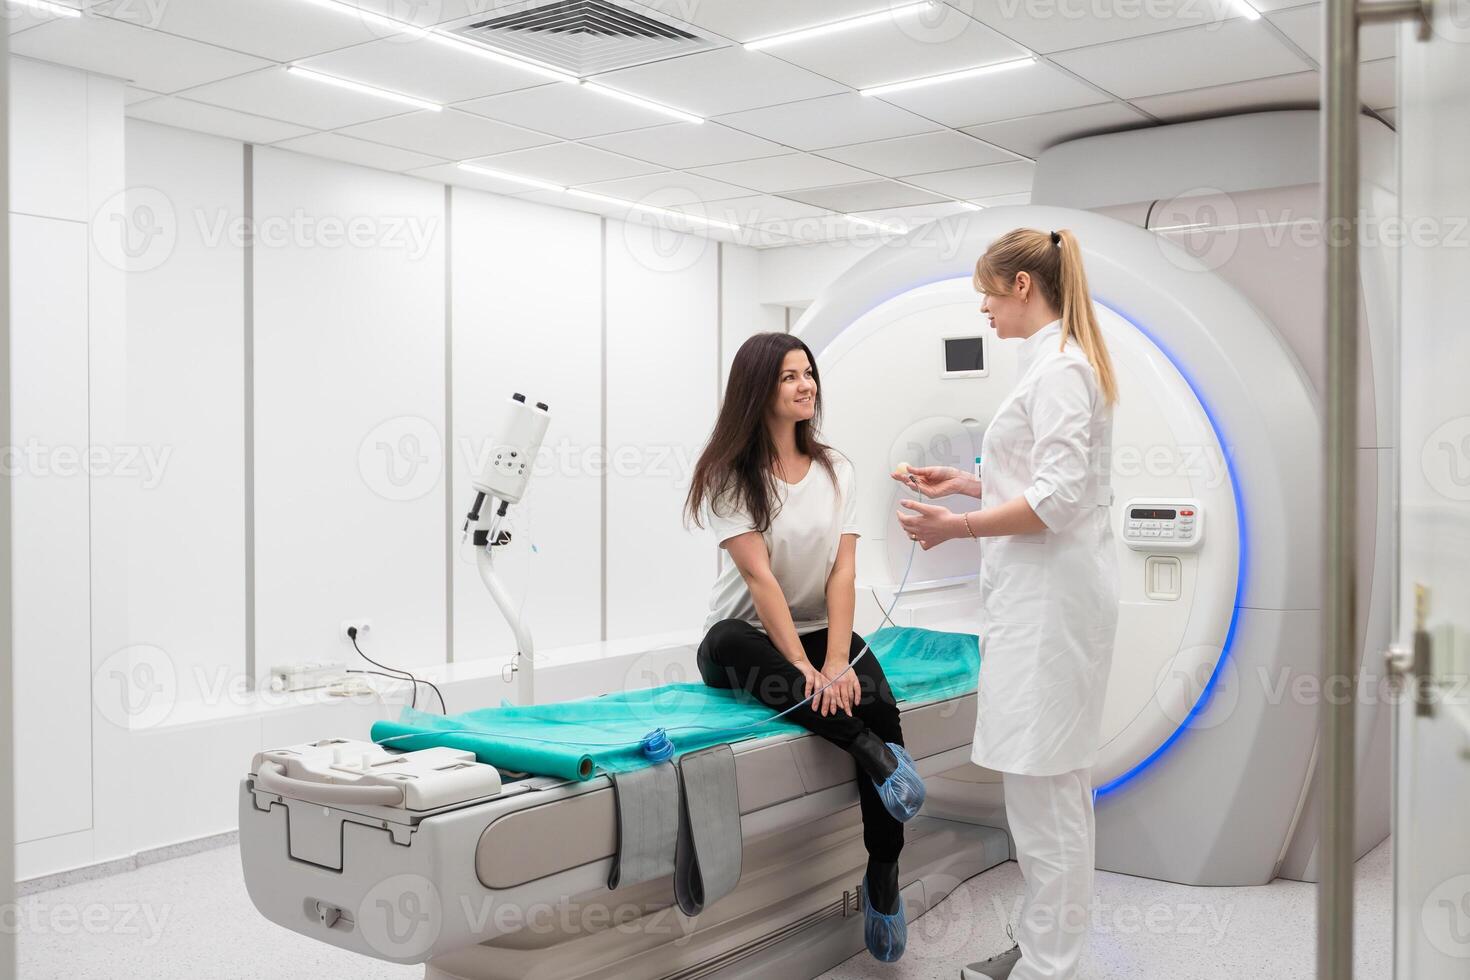 Medical CT or MRI Scan with a patient in the modern hospital laboratory. Interior of radiography department. Technologically advanced equipment in white room. Magnetic resonance diagnostics machine photo